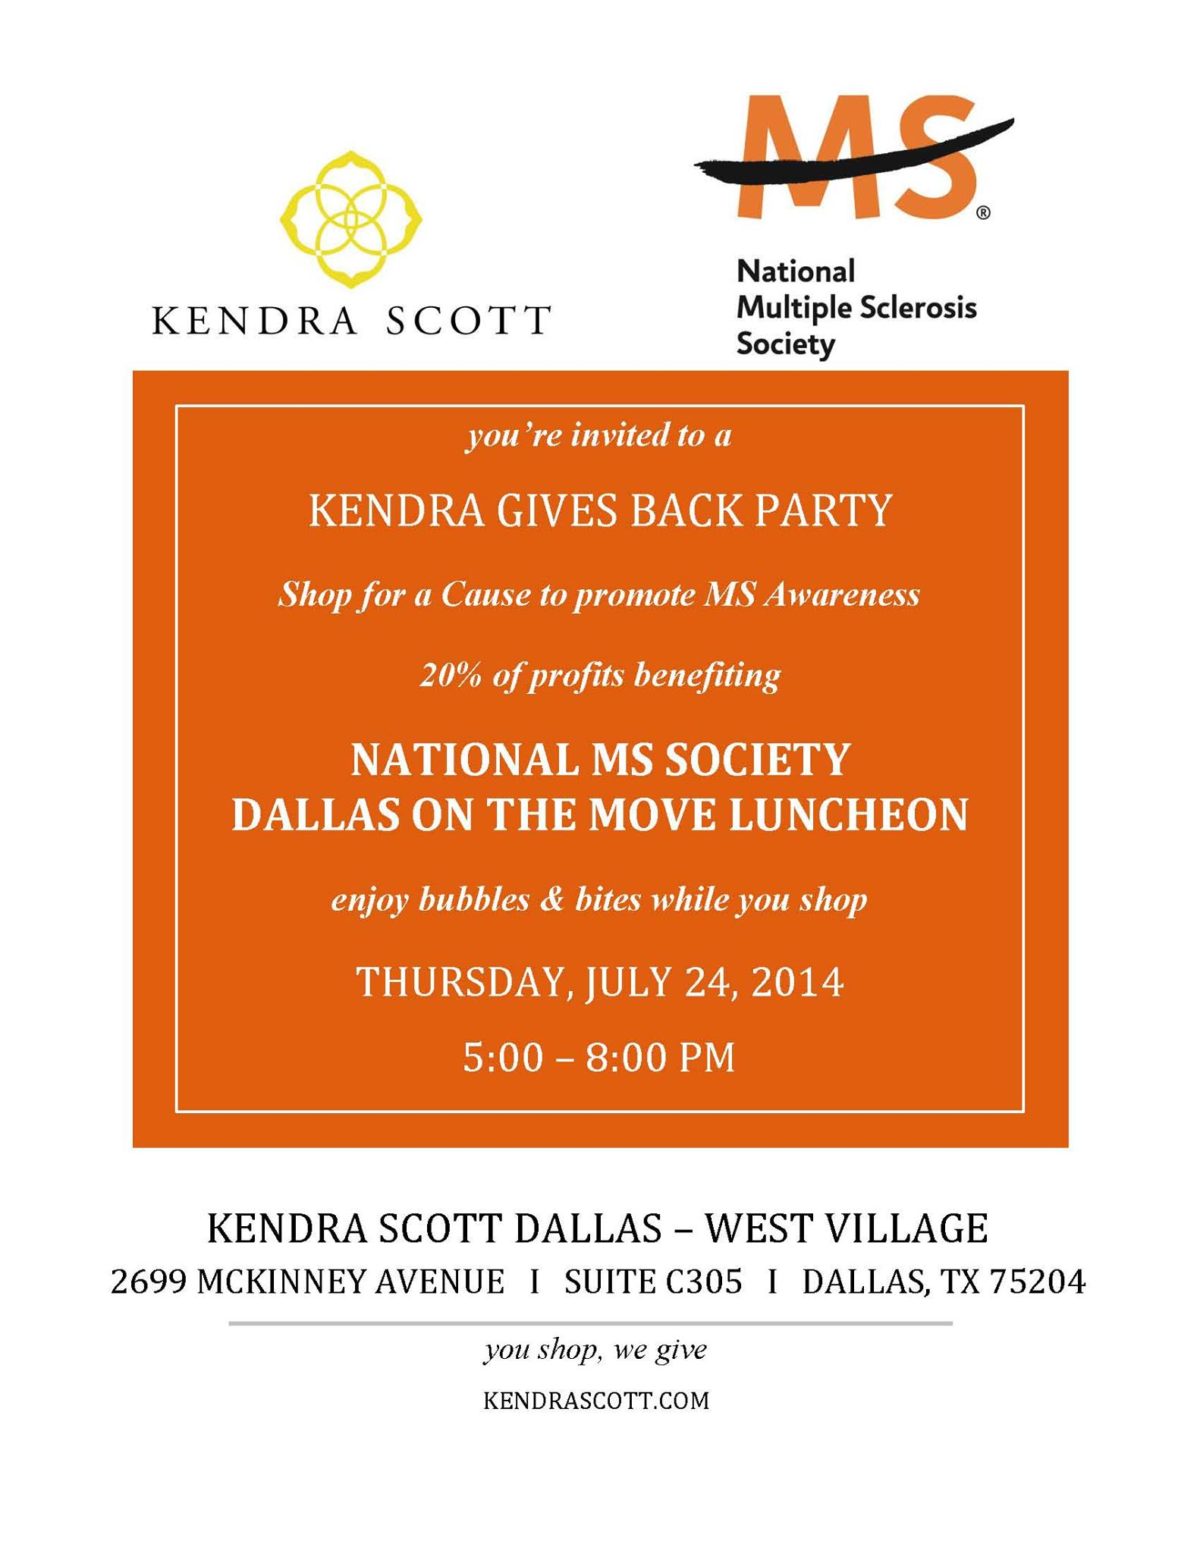 Kendra Scott Gives Back with the National Multiple Sclerosis Society